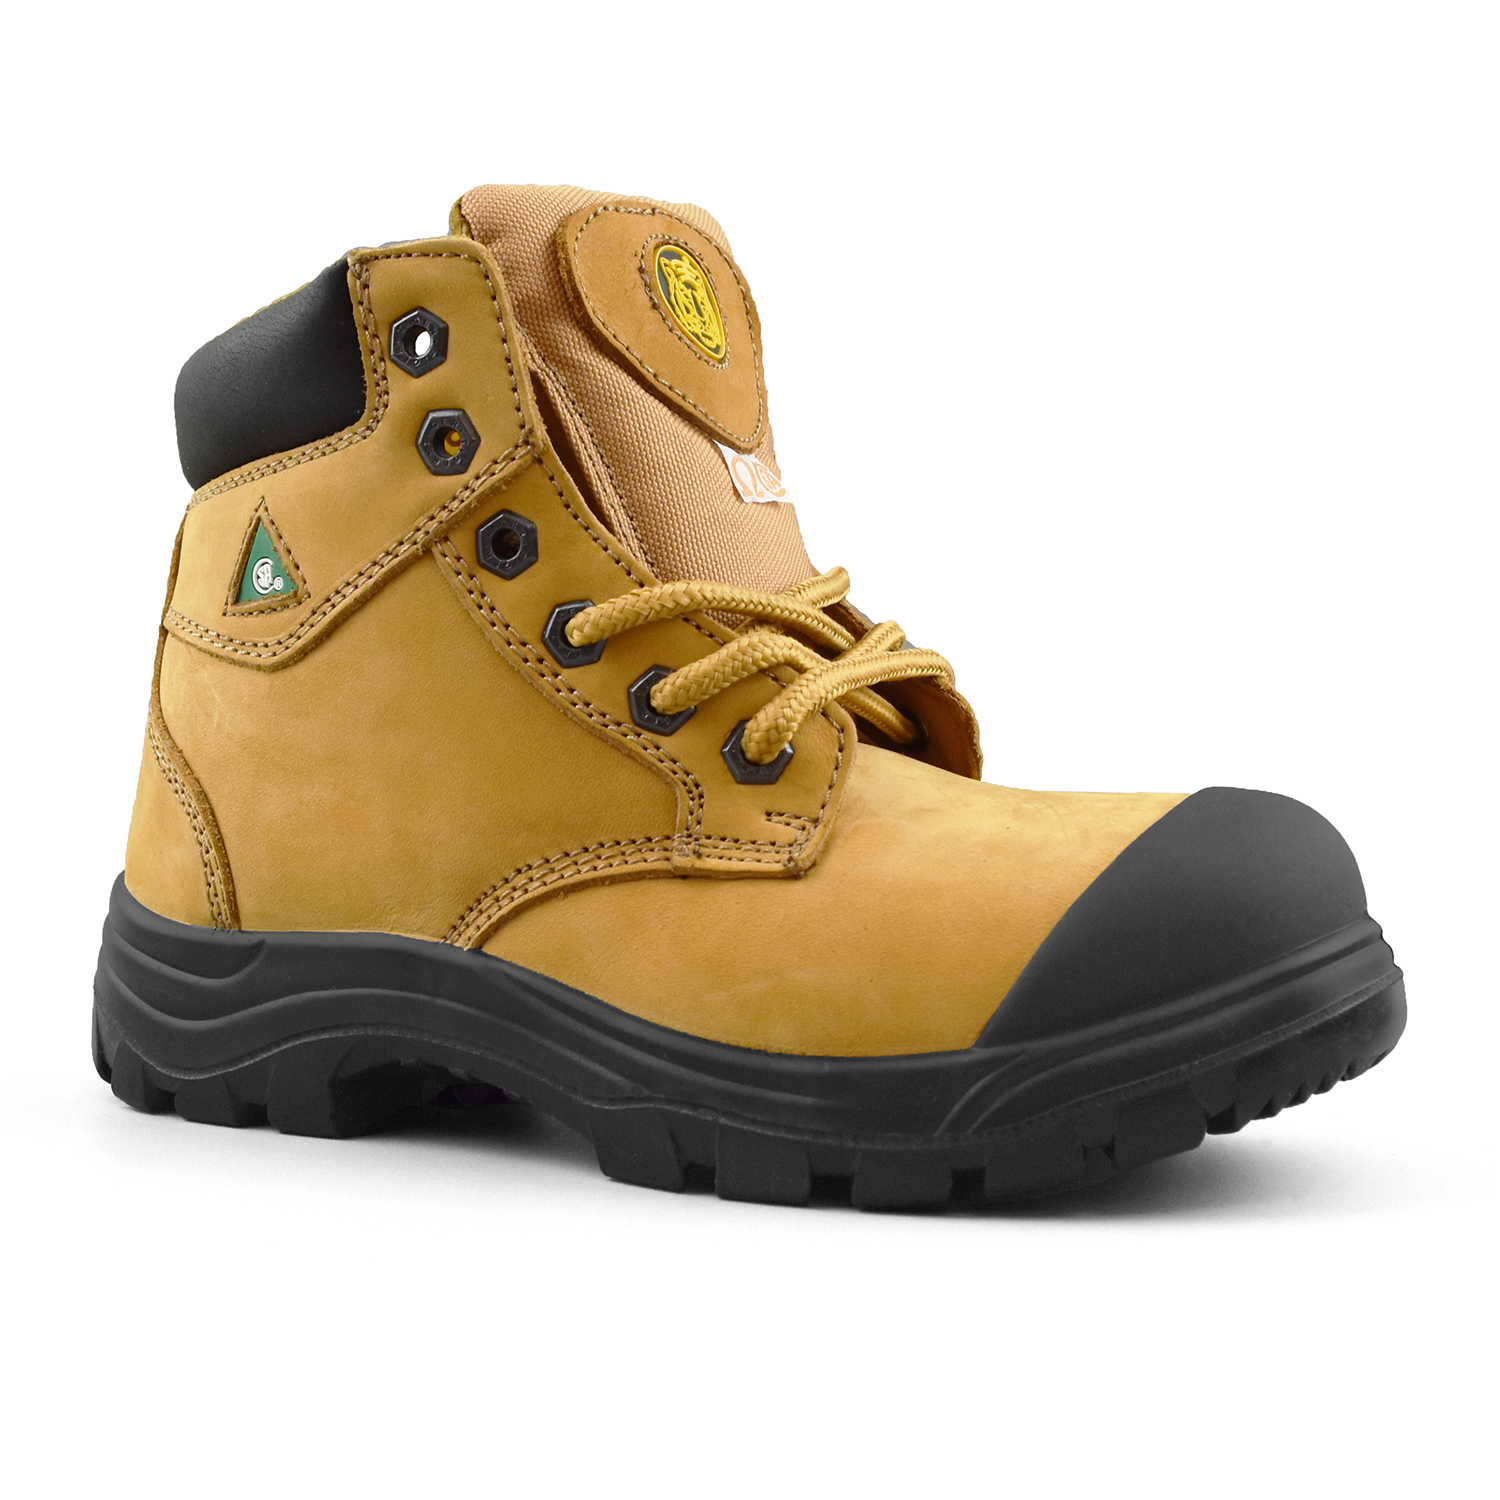 Tiger Safety CSA Mens Steel Toe Leather Work Safety Boots 3055